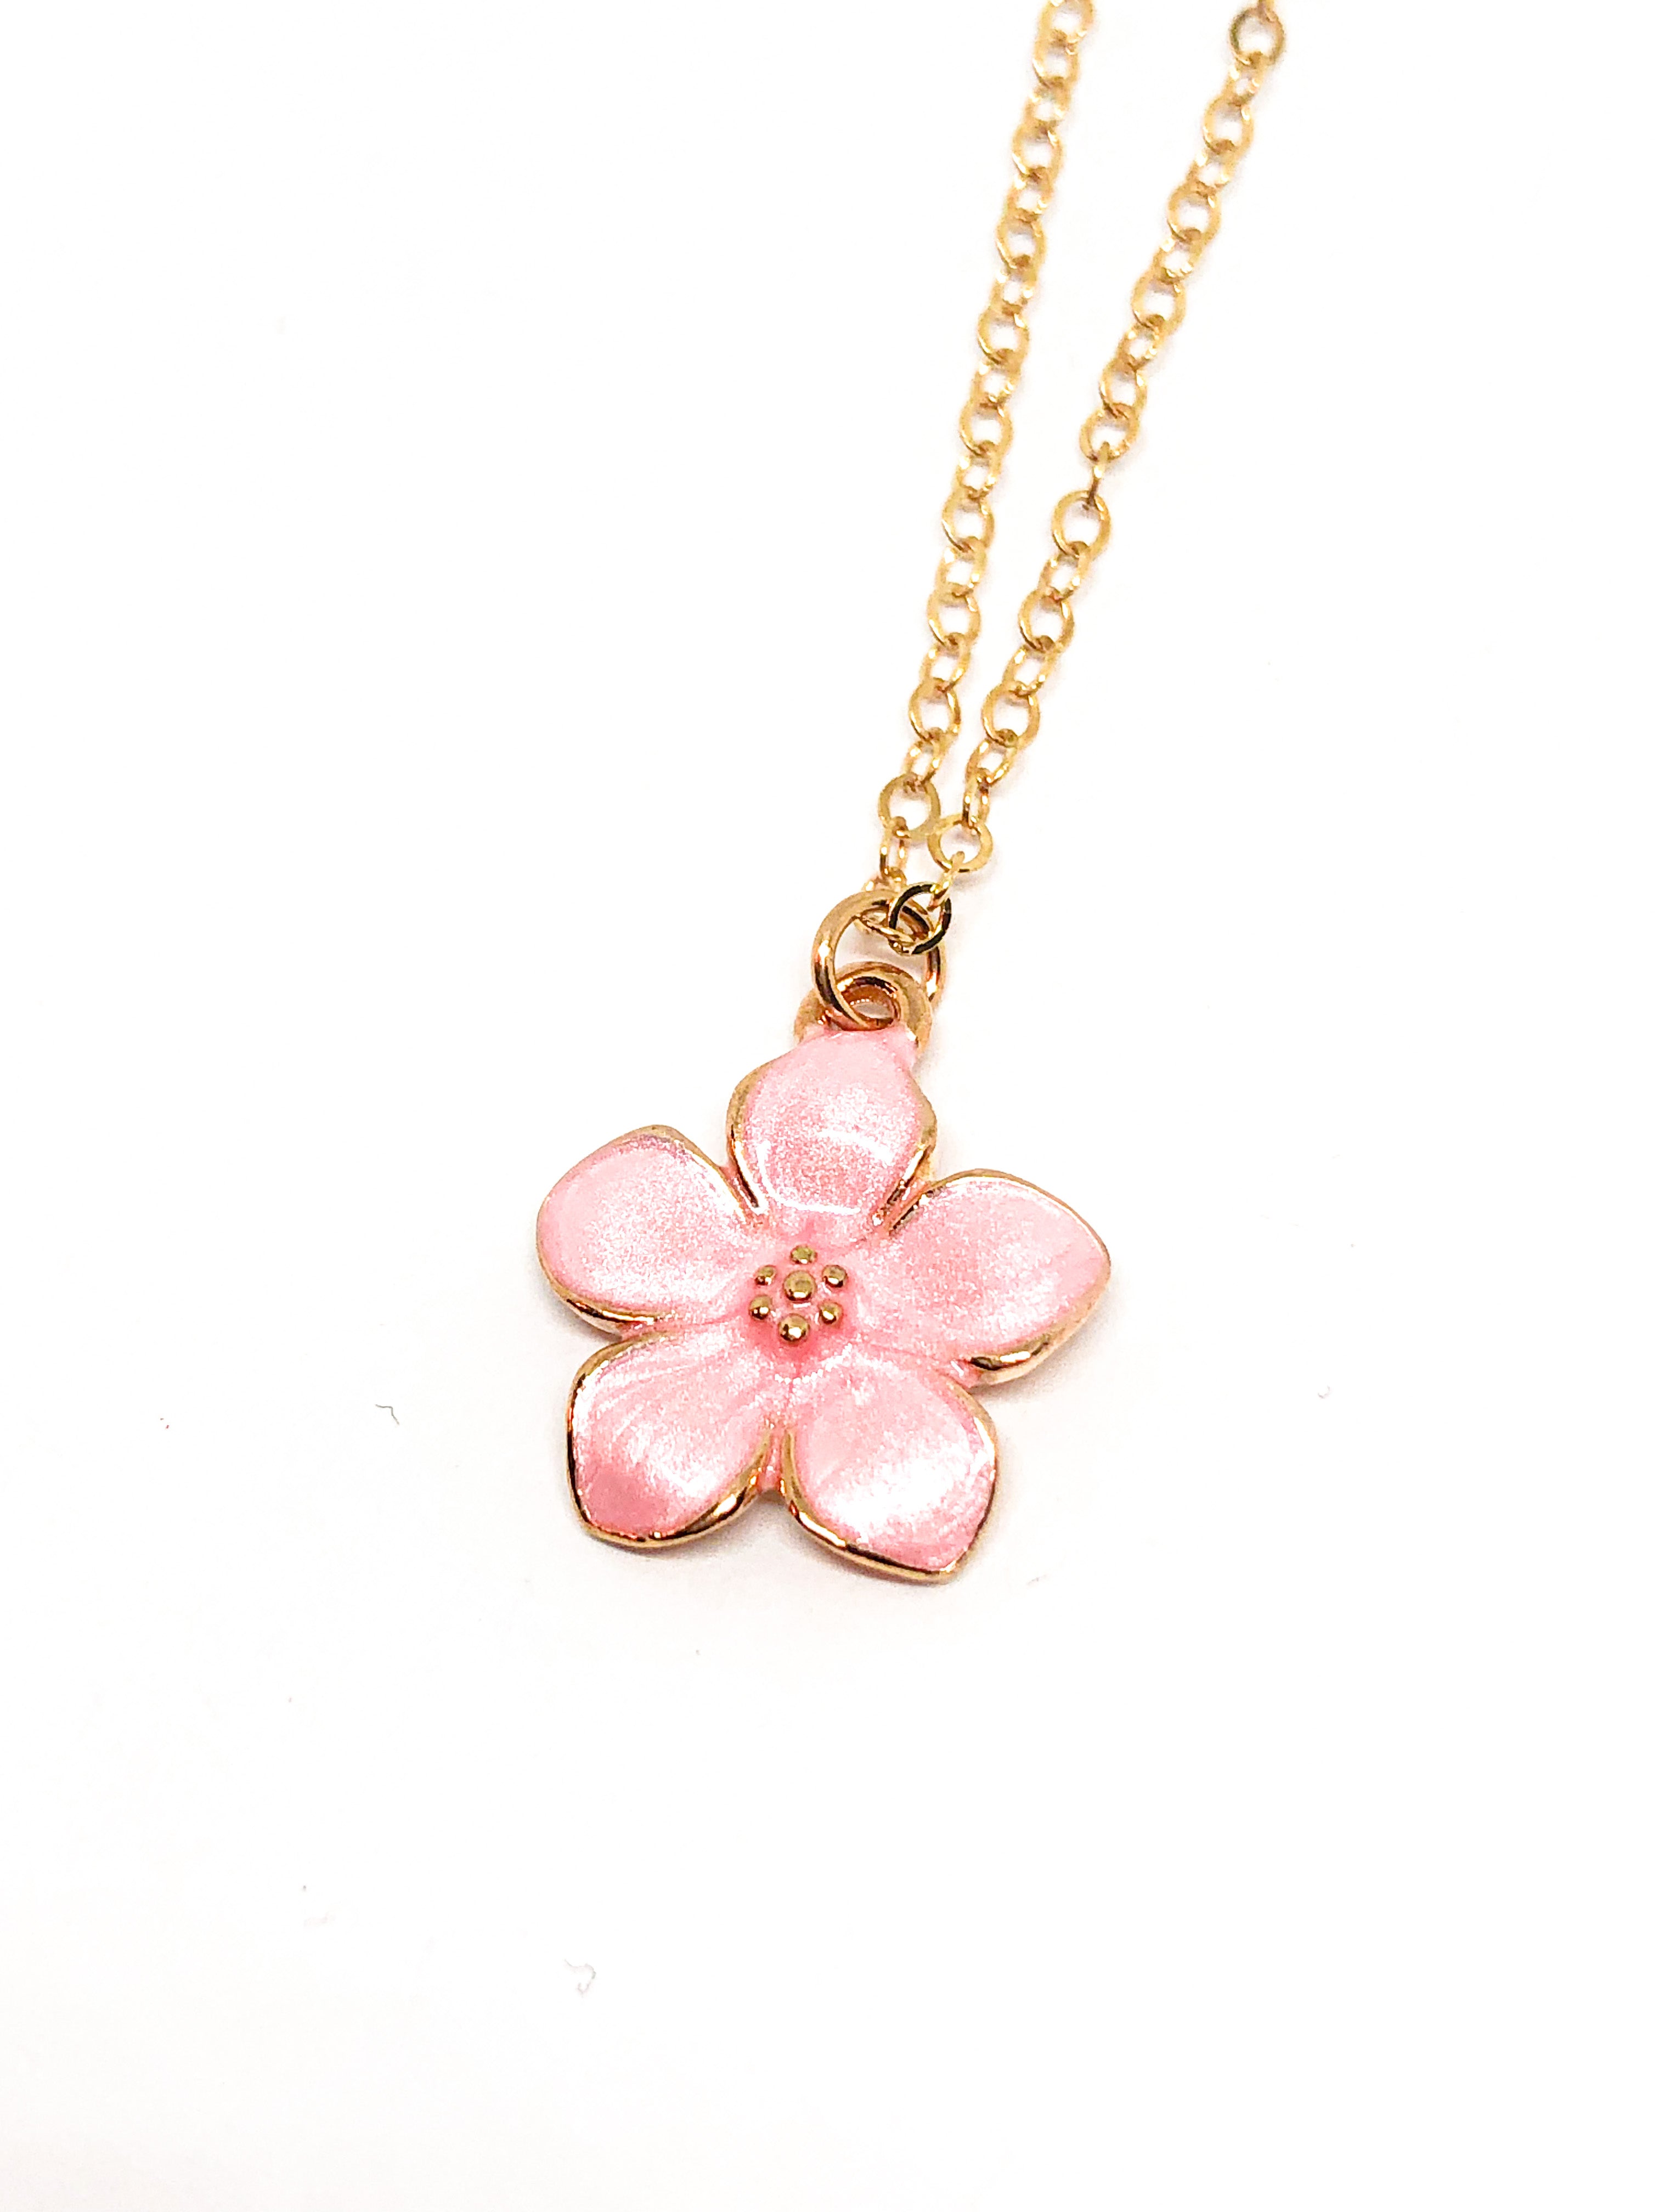 Repurposed Large Double Sided LV Pink Flower Charm Necklace – LINA